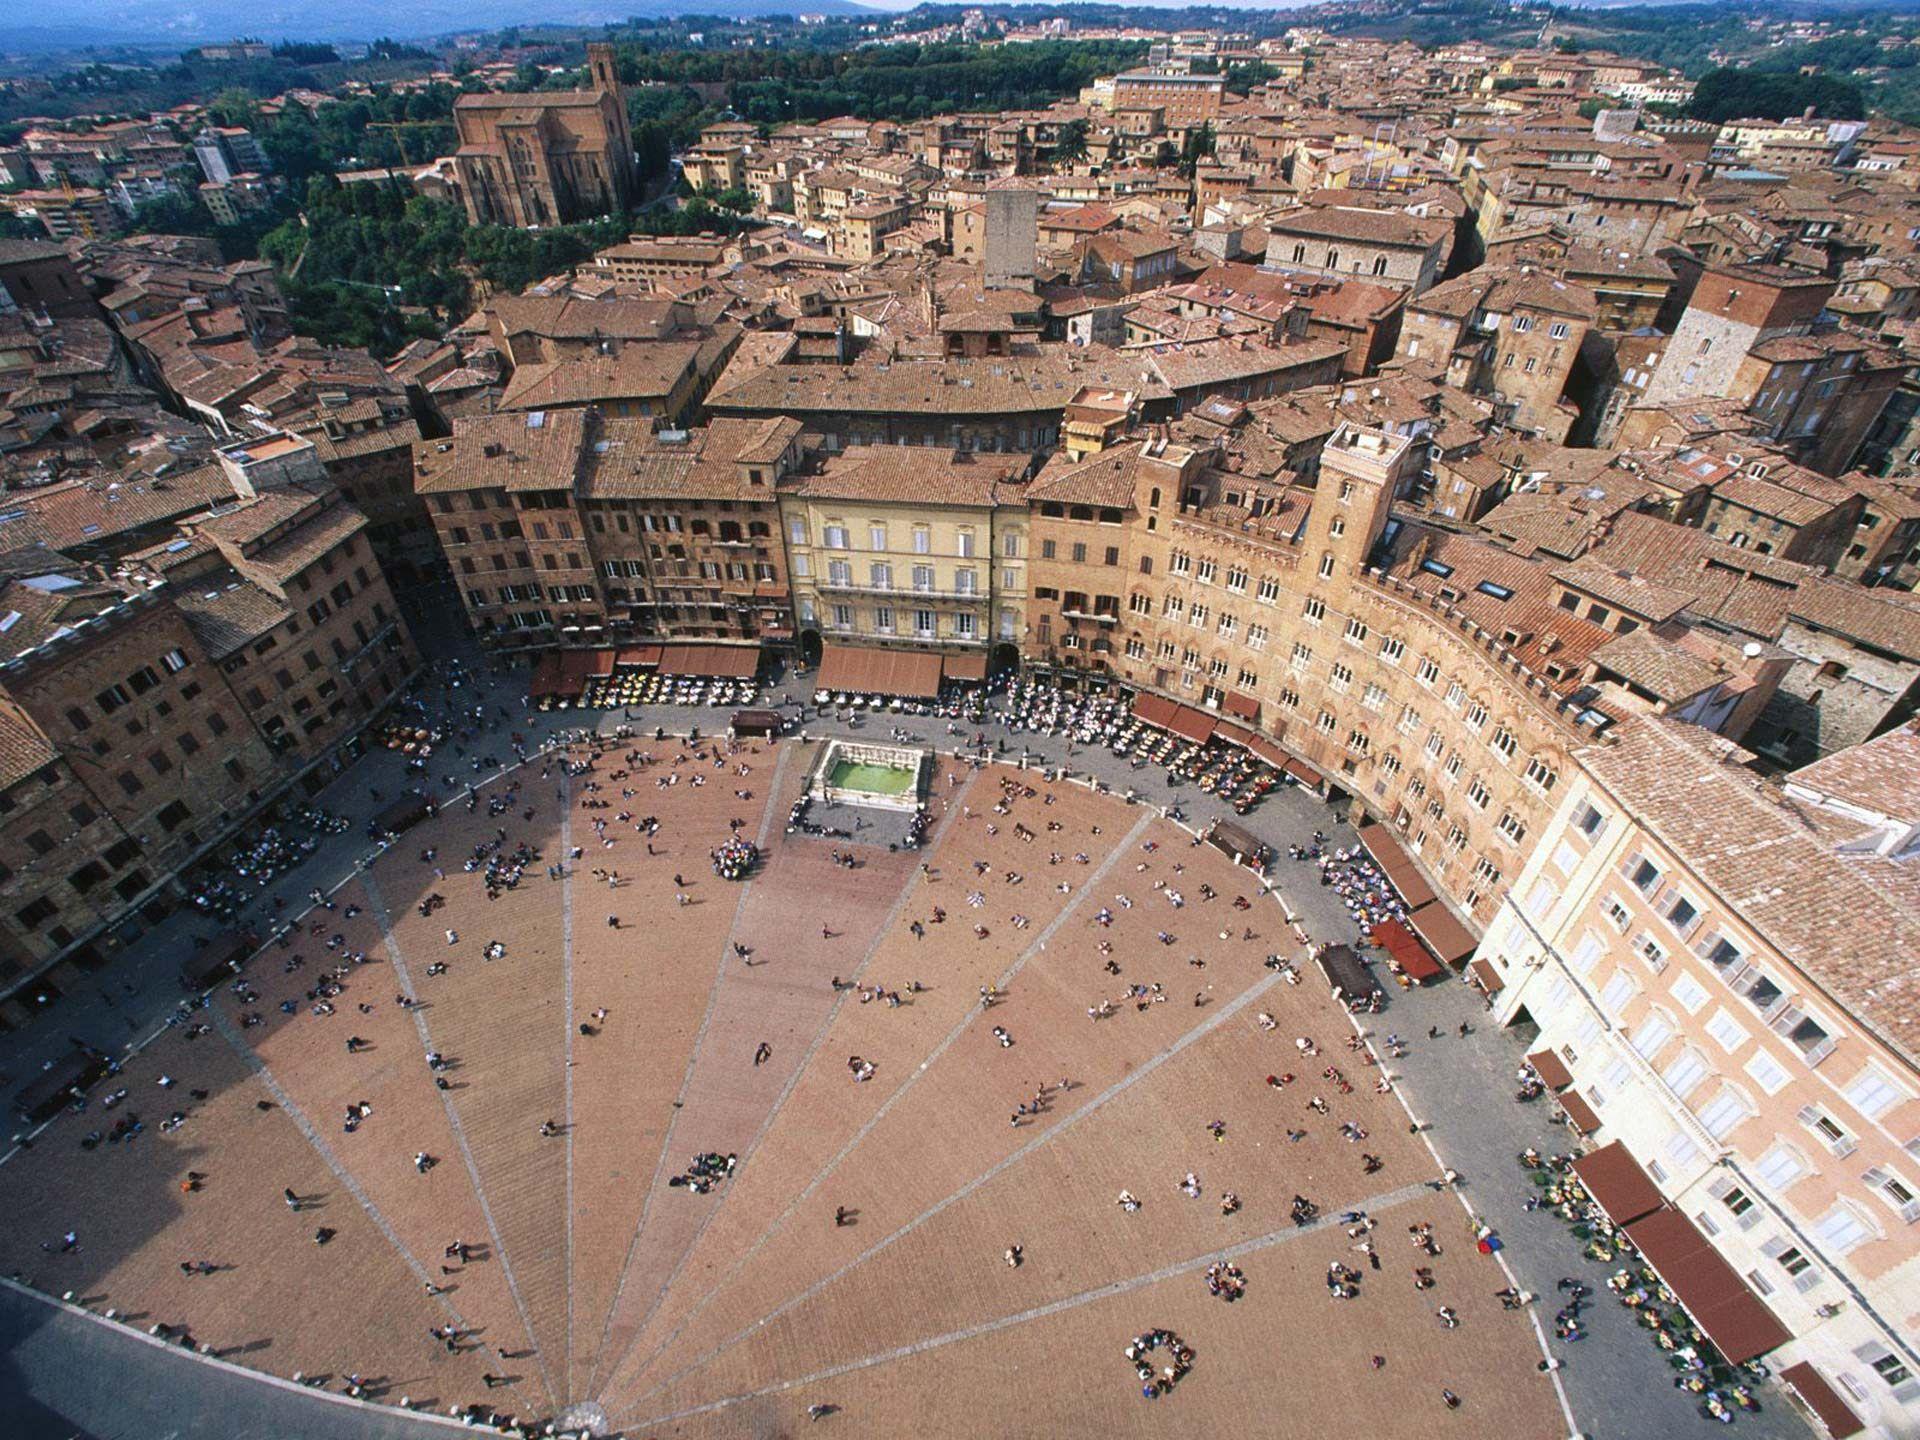 Piazza del Campo is the principal public space of Siena, Tuscany